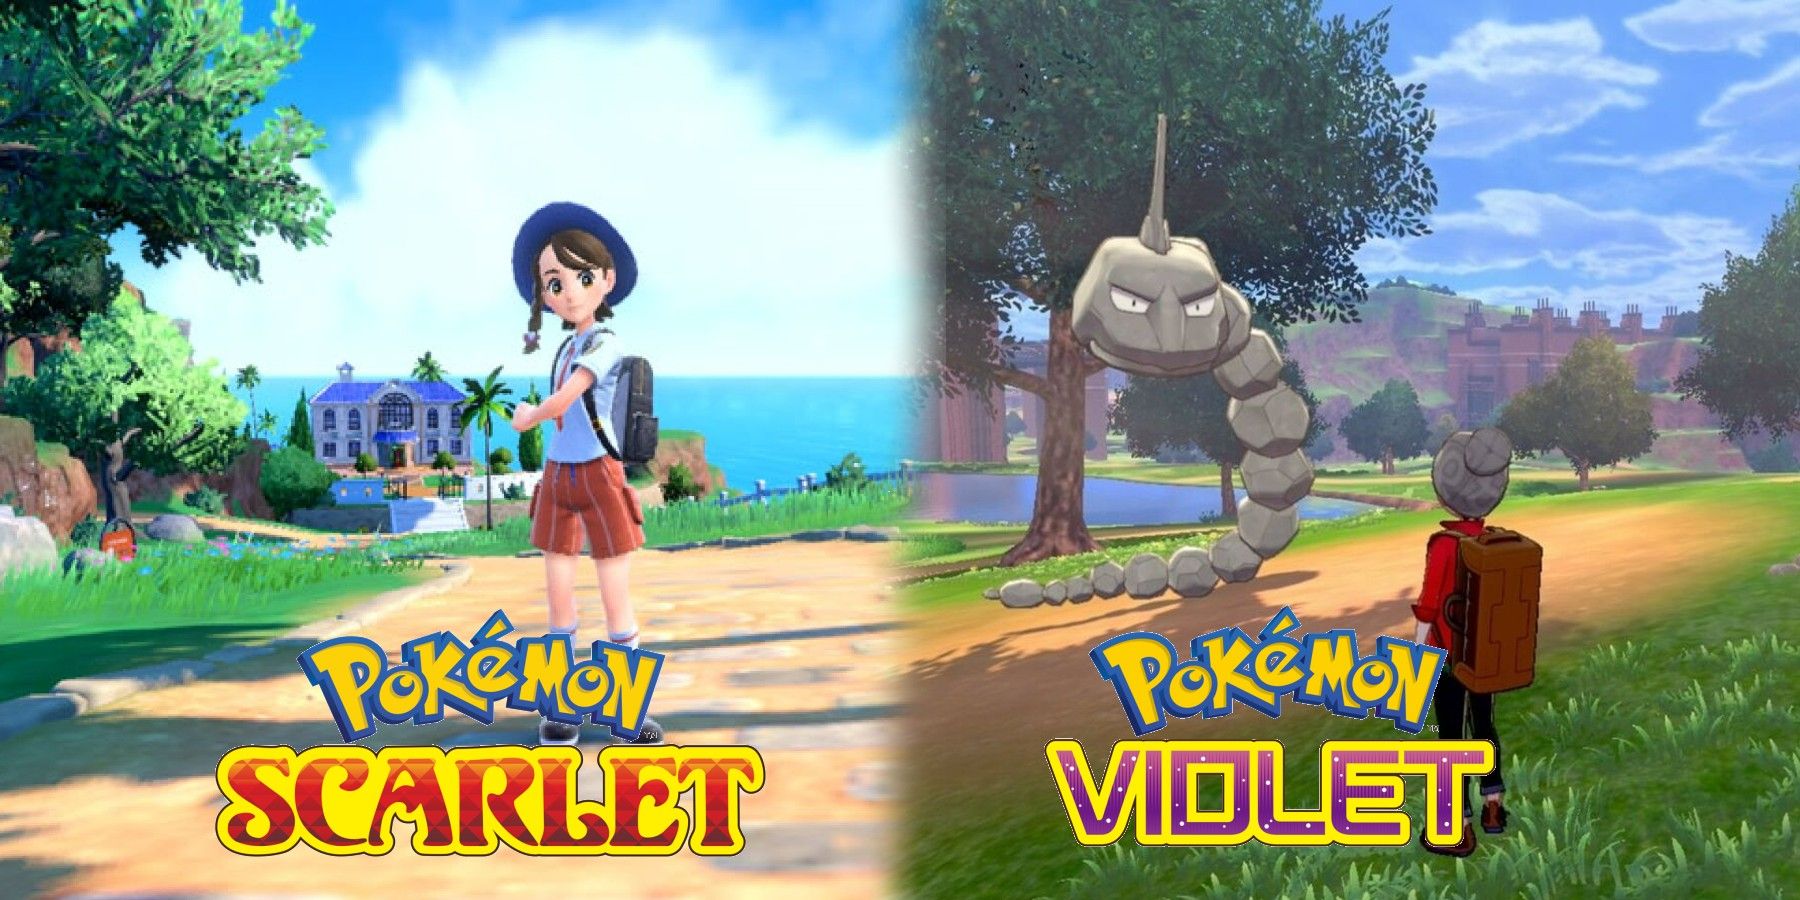 5 ways Pokemon Scarlet and Violet are better than Sword and Shield